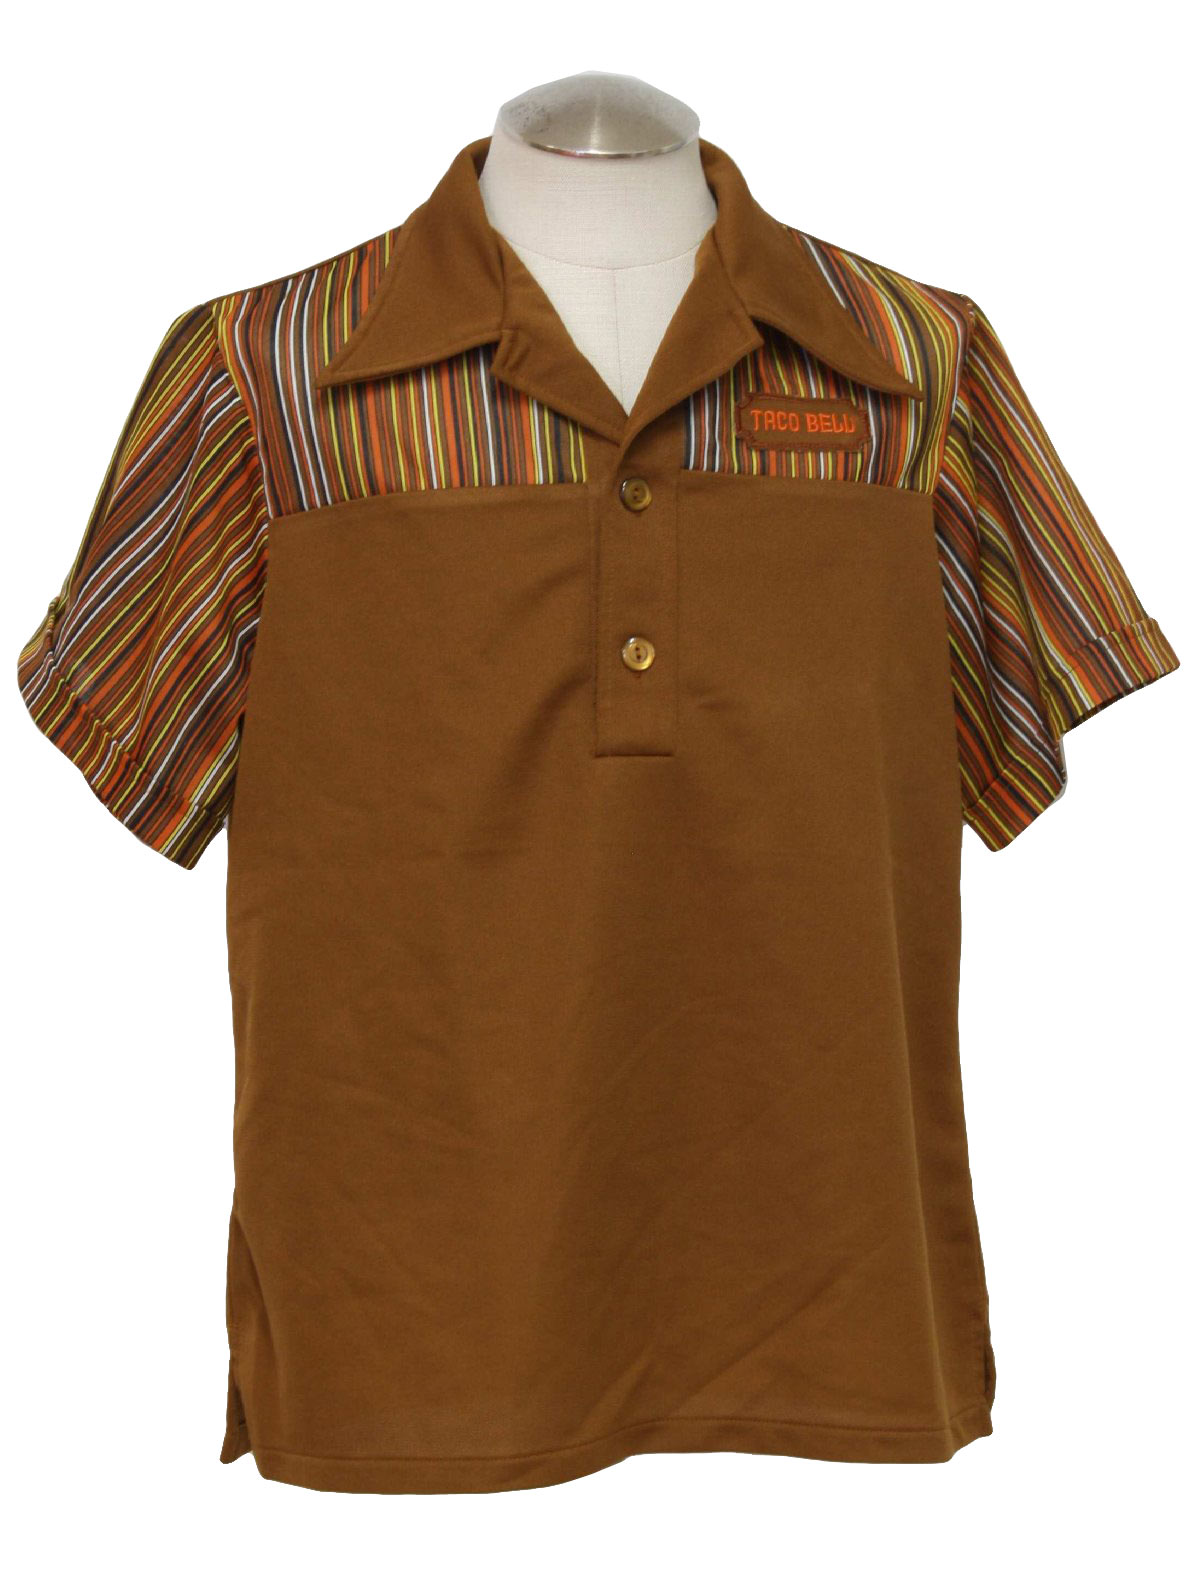 Seventies Boss Shirt: 70s -Boss- Mens saddle brown, orange, yellow, white  and black polyester short sleeve pullover knit uniform shirt. Taco Bell  logo patch on the left chest, with a stripe patterned